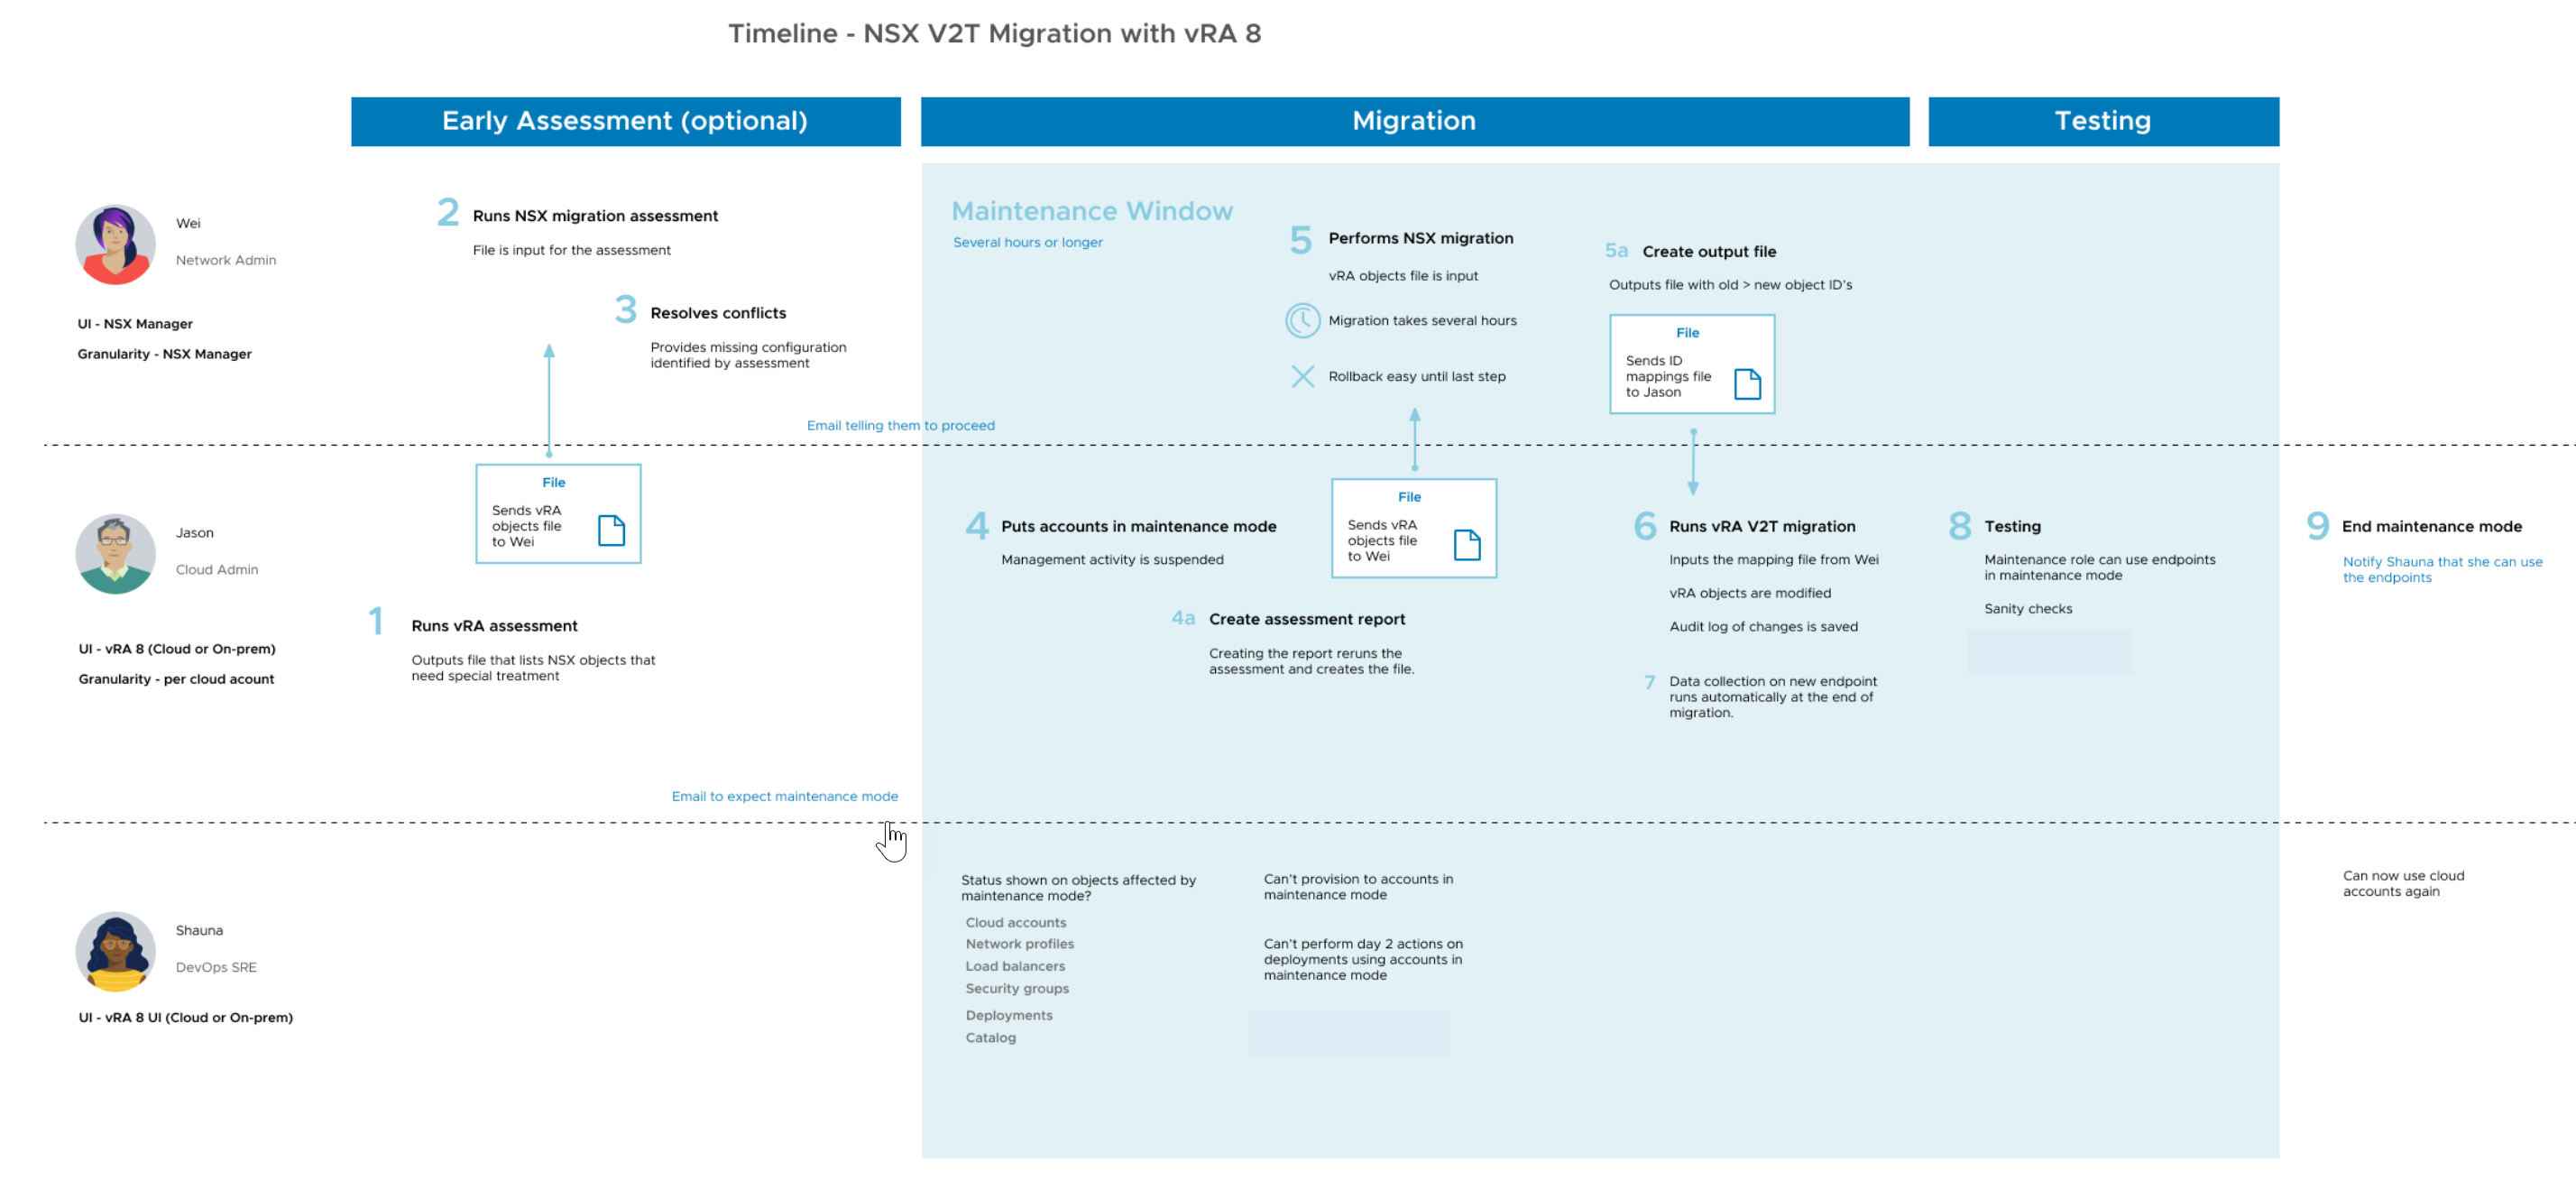 Overview of NSX and vRA admin-related tasks in V2T the migration process.